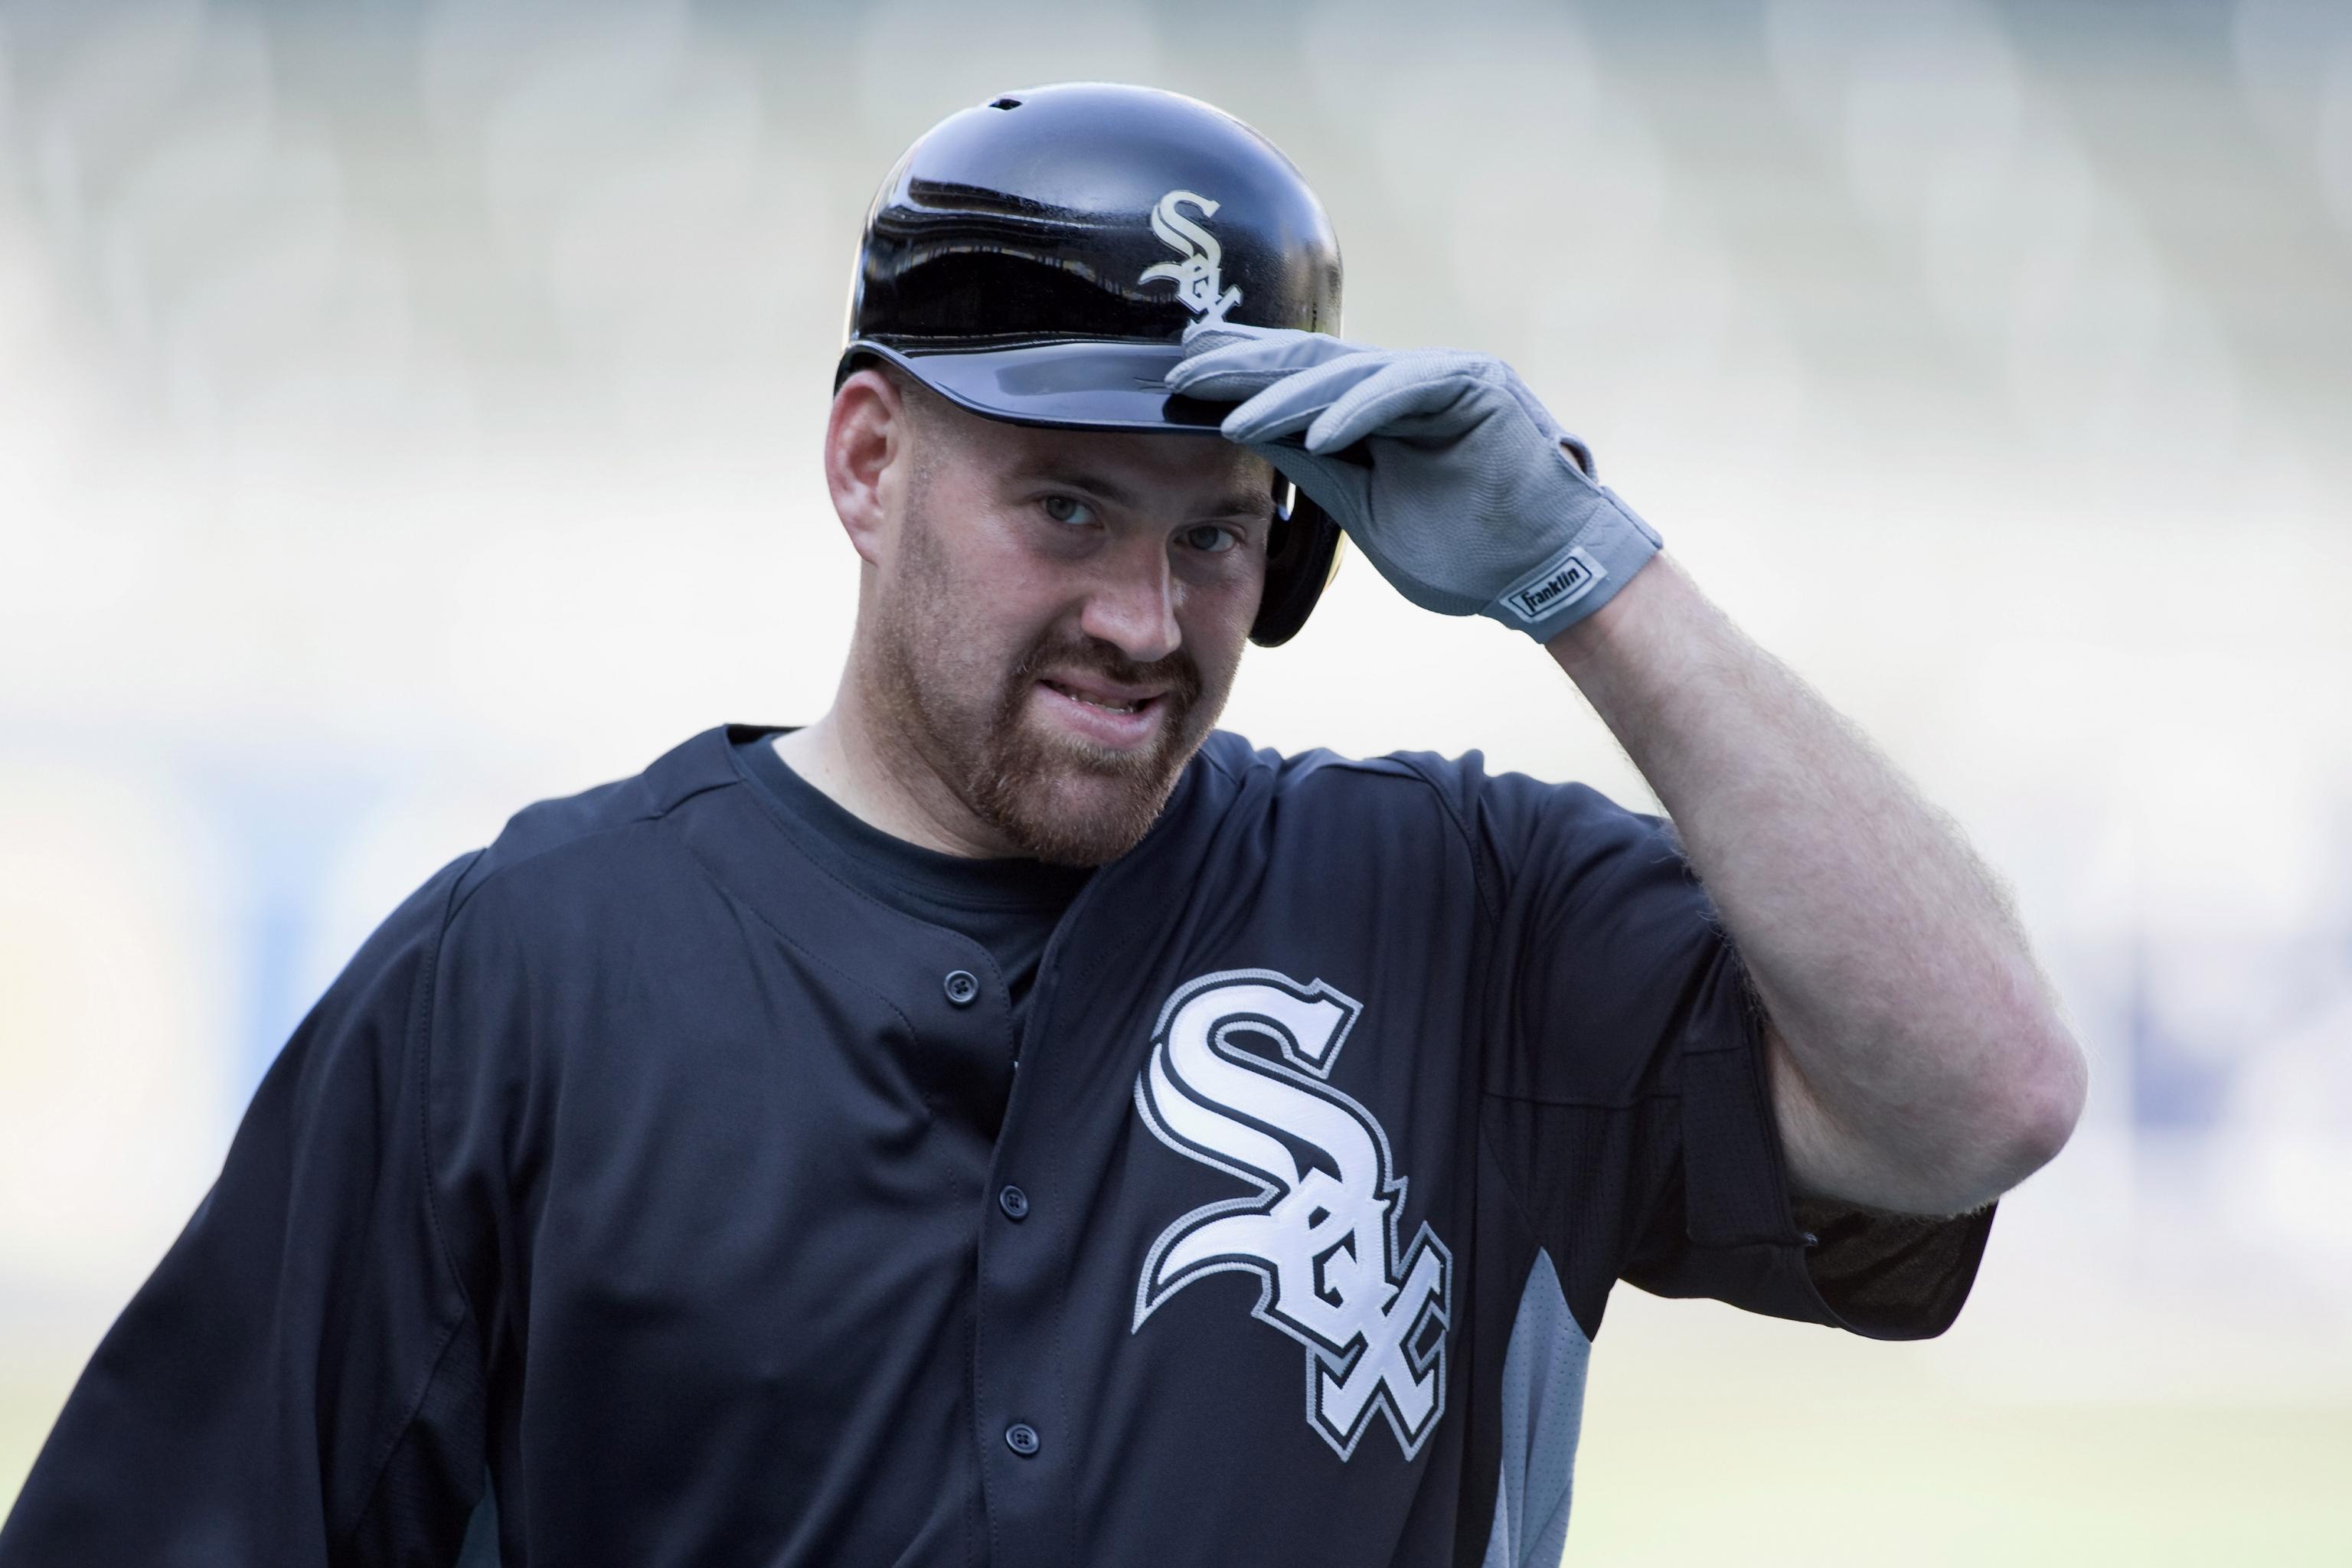 Kevin Youkilis: Even as a Diehard Boston Red Sox Fan, I Ain't Mad